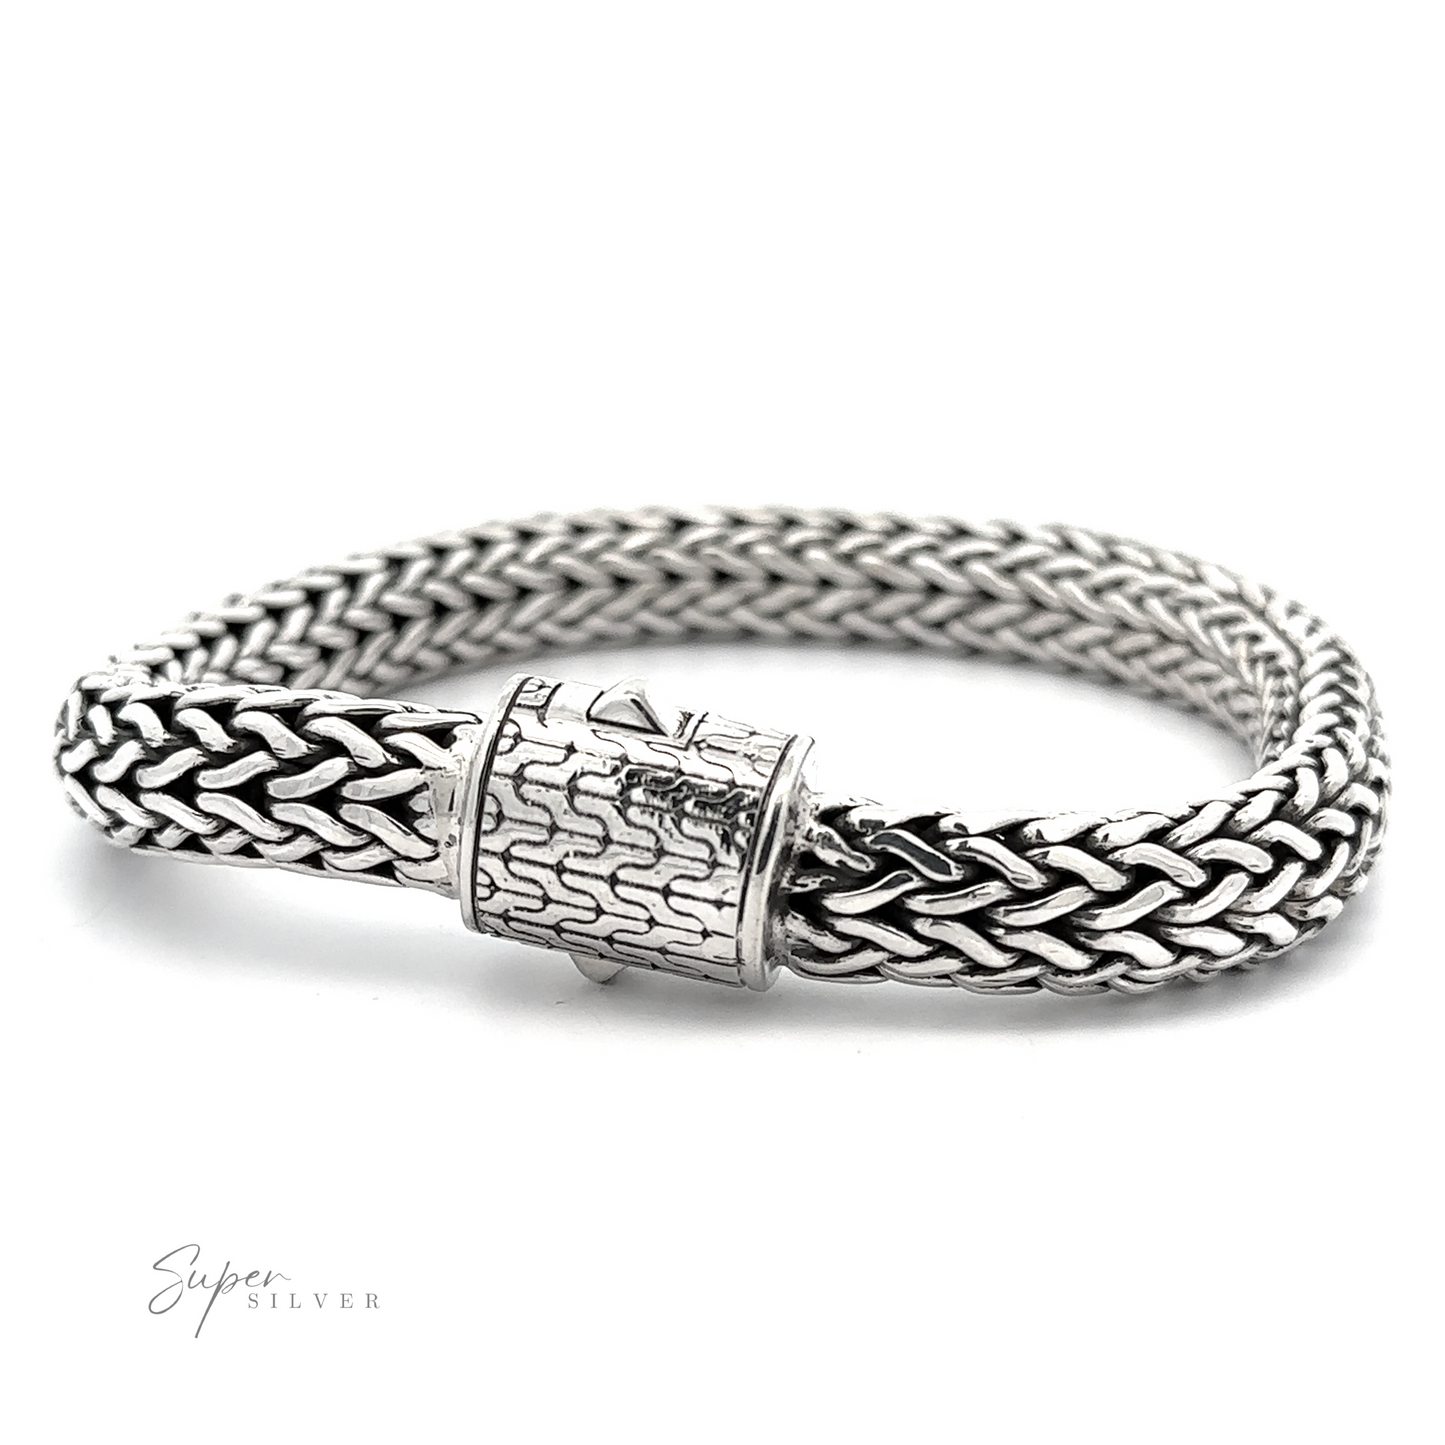 A woven Heavy Braided Bracelet with an intricate snap clasp, featuring a contrasting pattern and texture. The brand name "Super Silver" is inscribed in the bottom left corner.